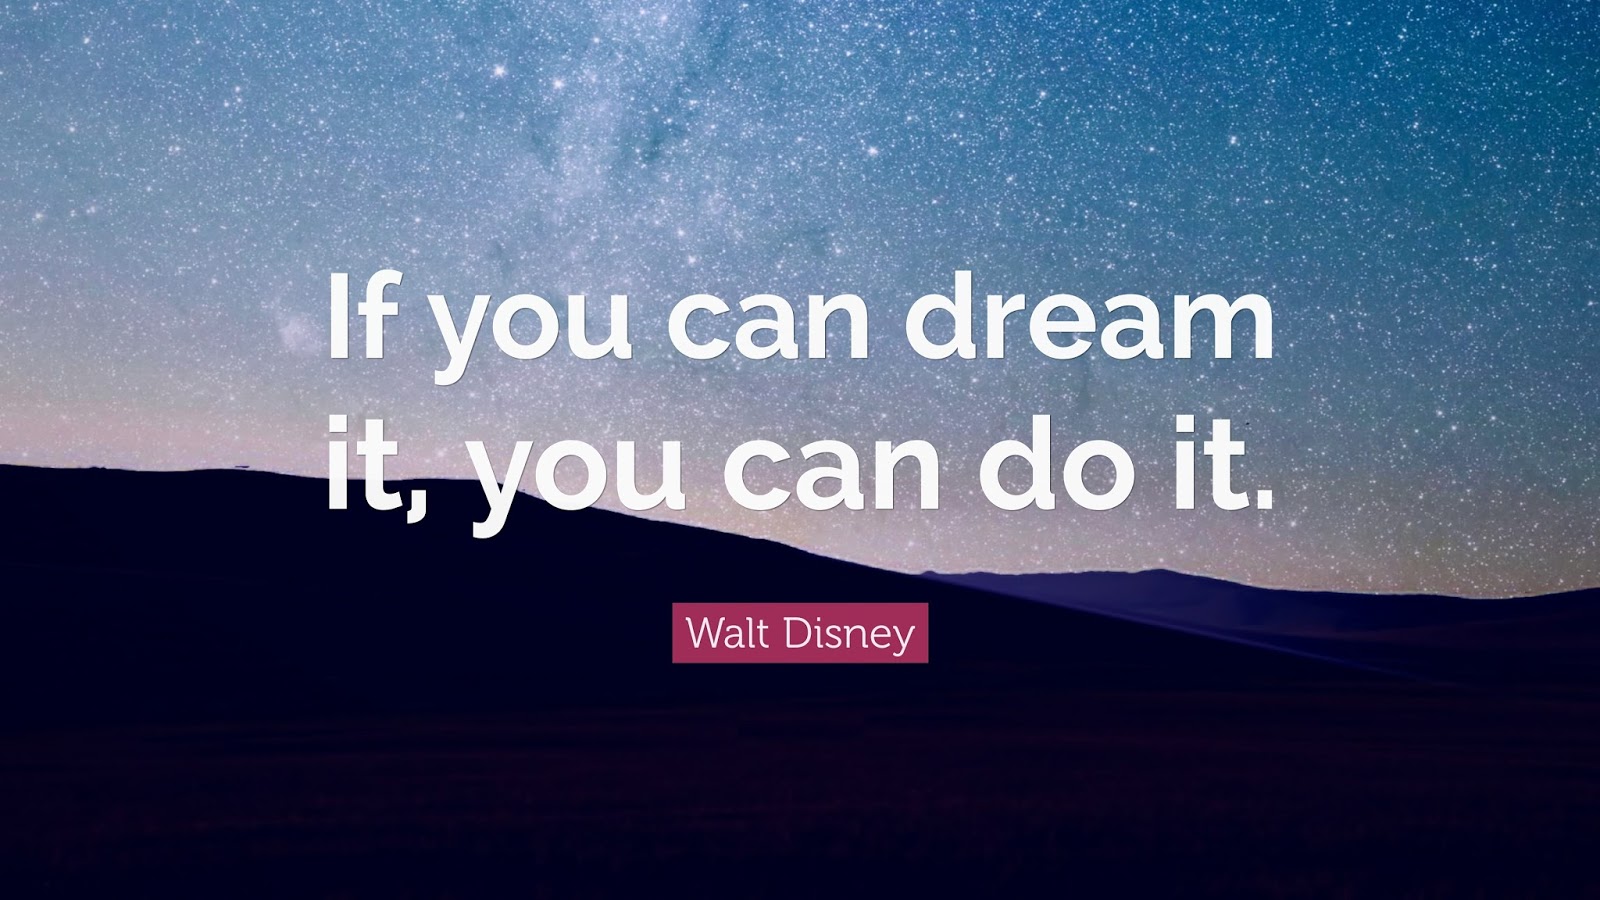 You Can Do It Quotes 18 Best Quotes And Sayings